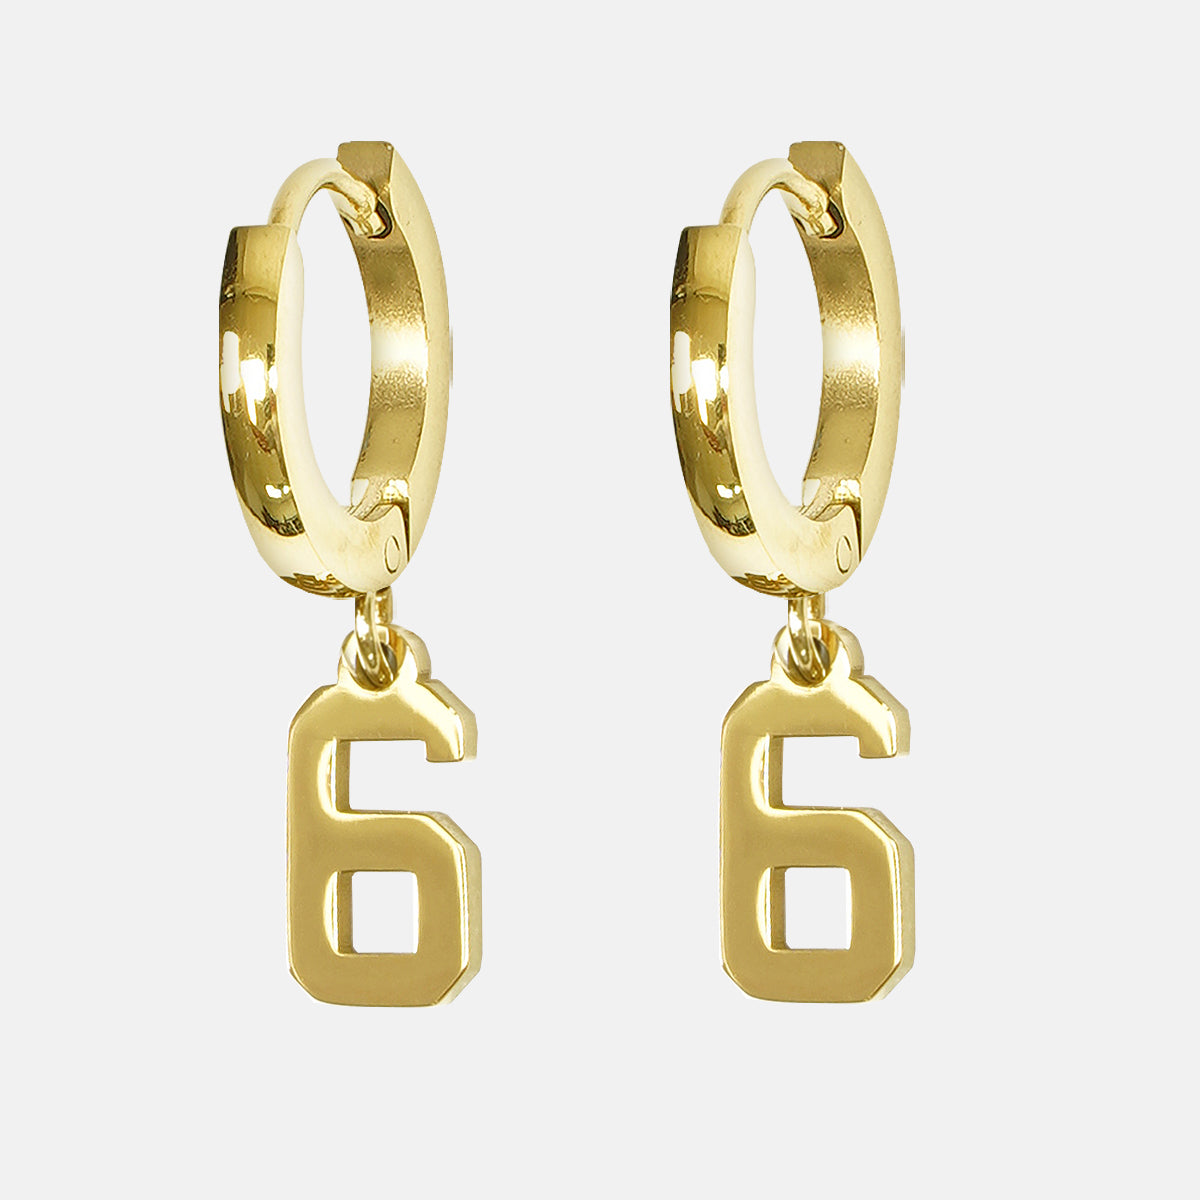 6 Number Earring - Gold Plated Stainless Steel